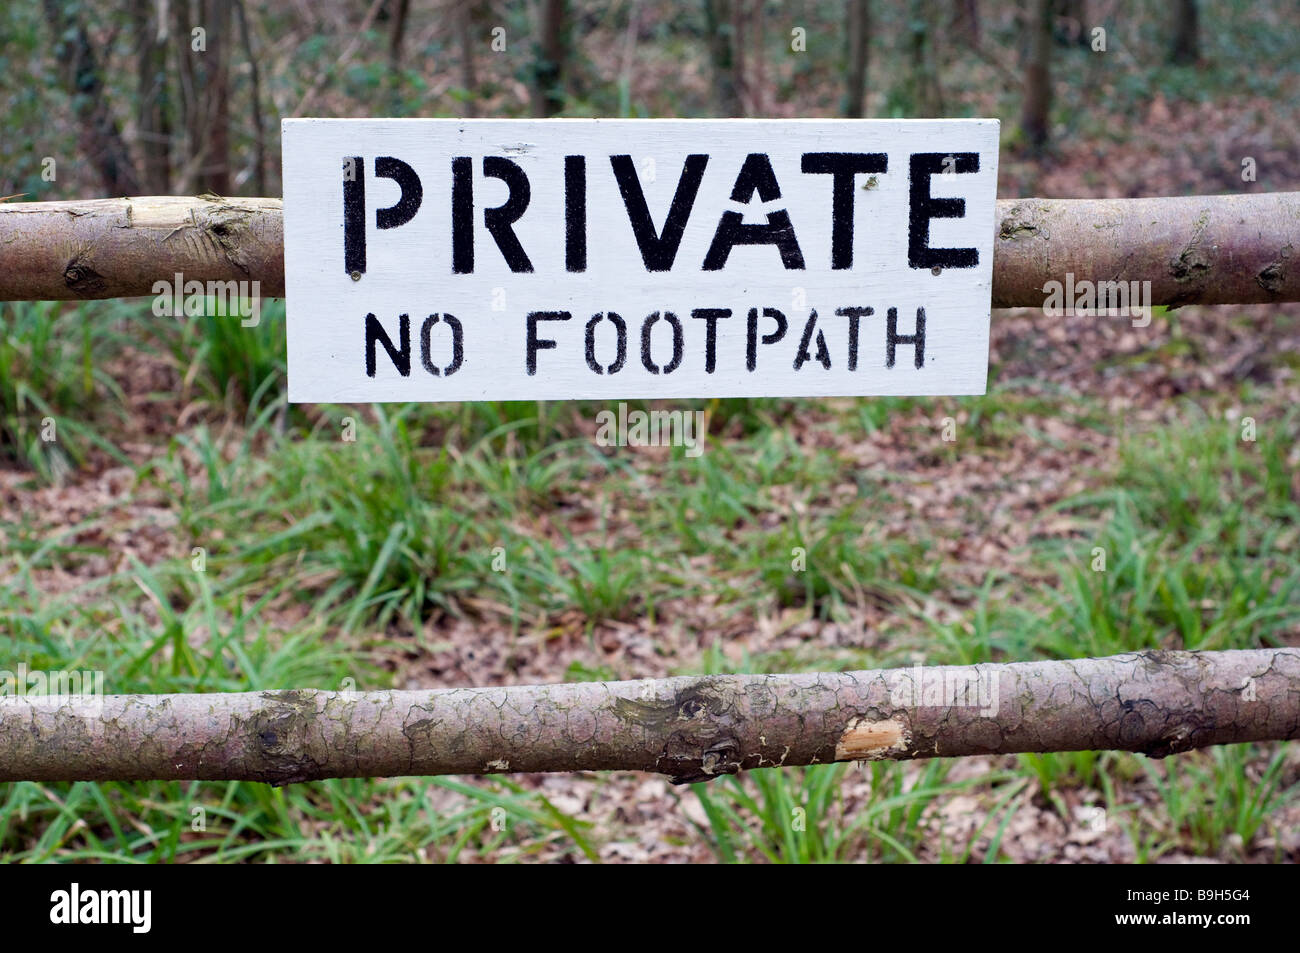 Private No Footpath Sign, Woodland, No Right of Way, Hampstead, Yarmouth, Isle of Wight, England, UK, GB. Stock Photo